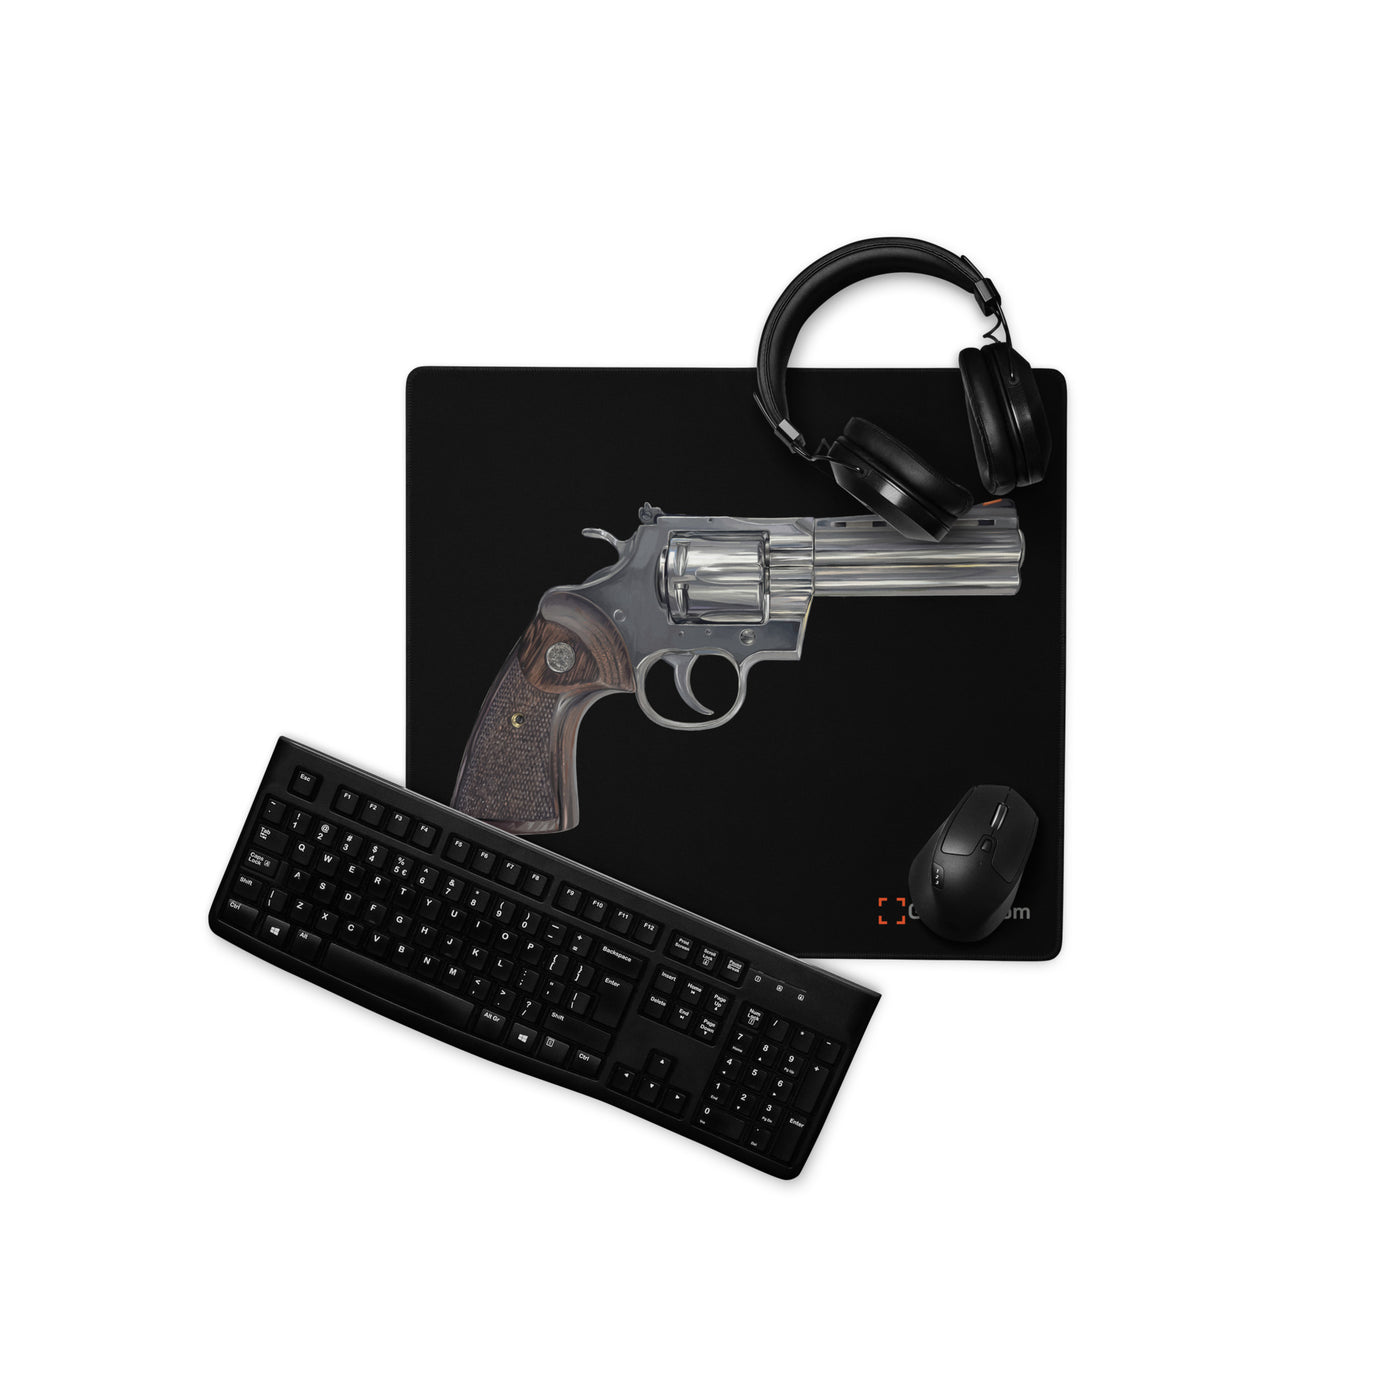 Wood & Stainless .357 Magnum Revolver Gaming Mouse Pad - Just The Piece - Black Background